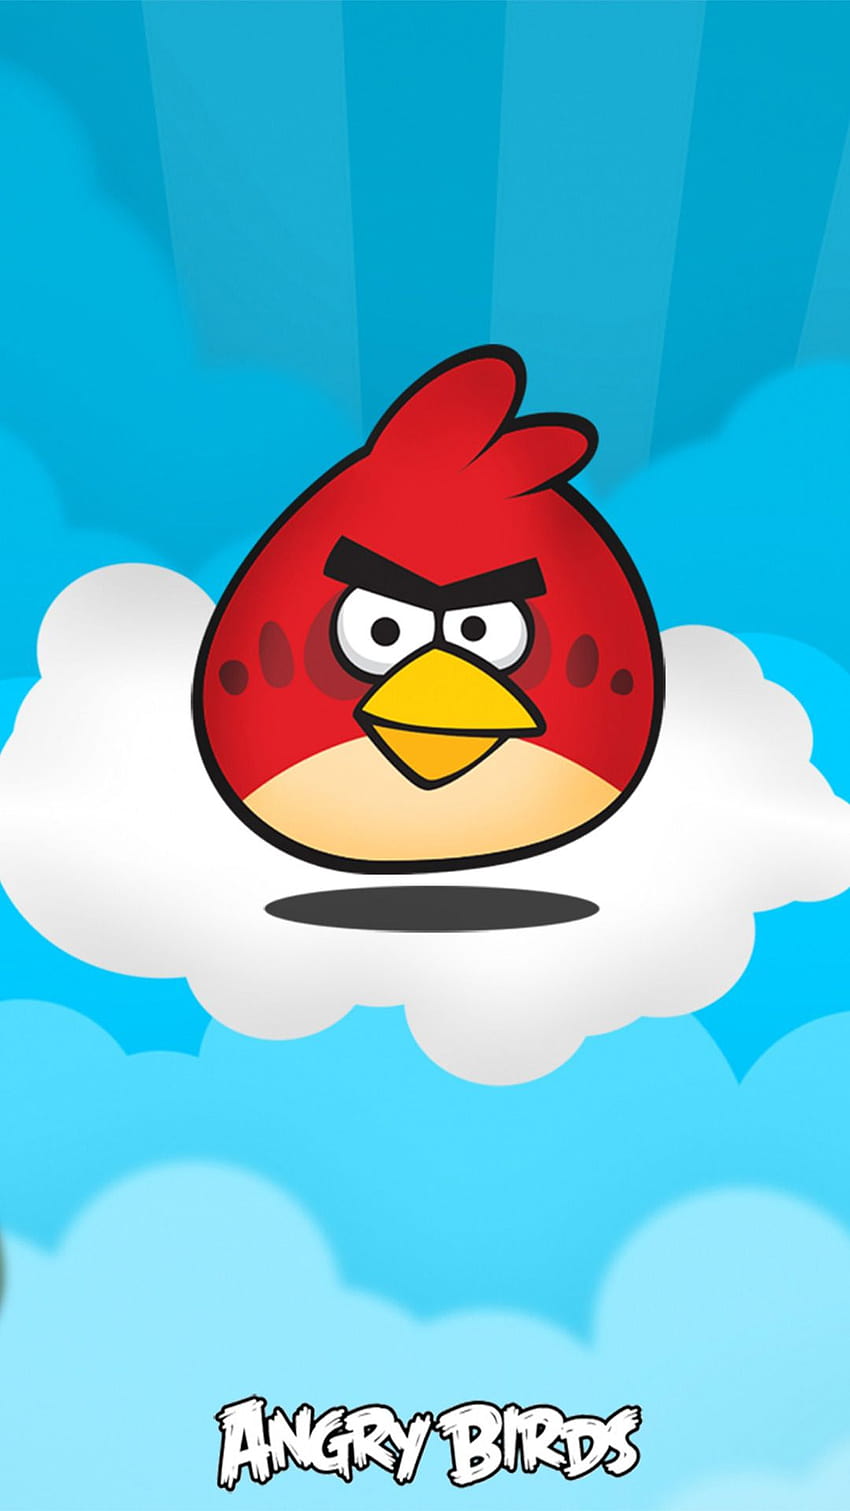 Angry Birds Group, angry birds for mobile HD phone wallpaper